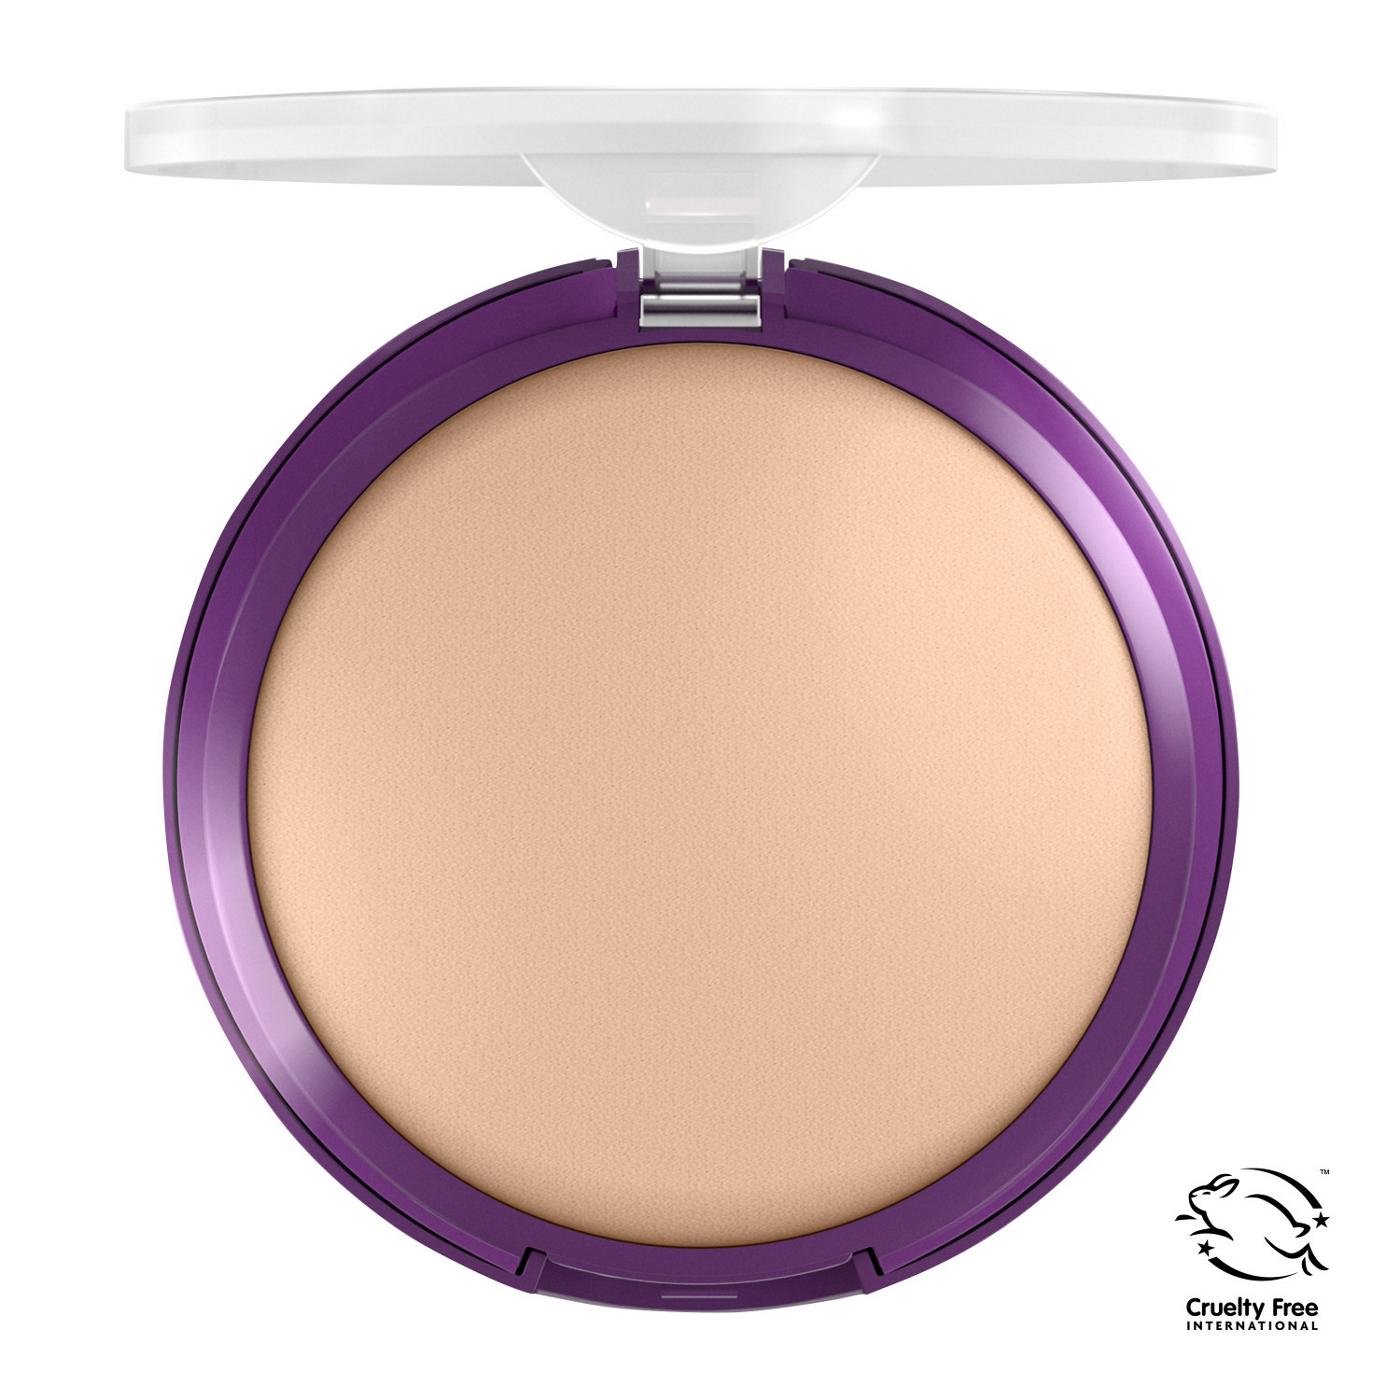 Covergirl Simply Ageless Pressed Powder 200 Fair Ivory; image 6 of 10